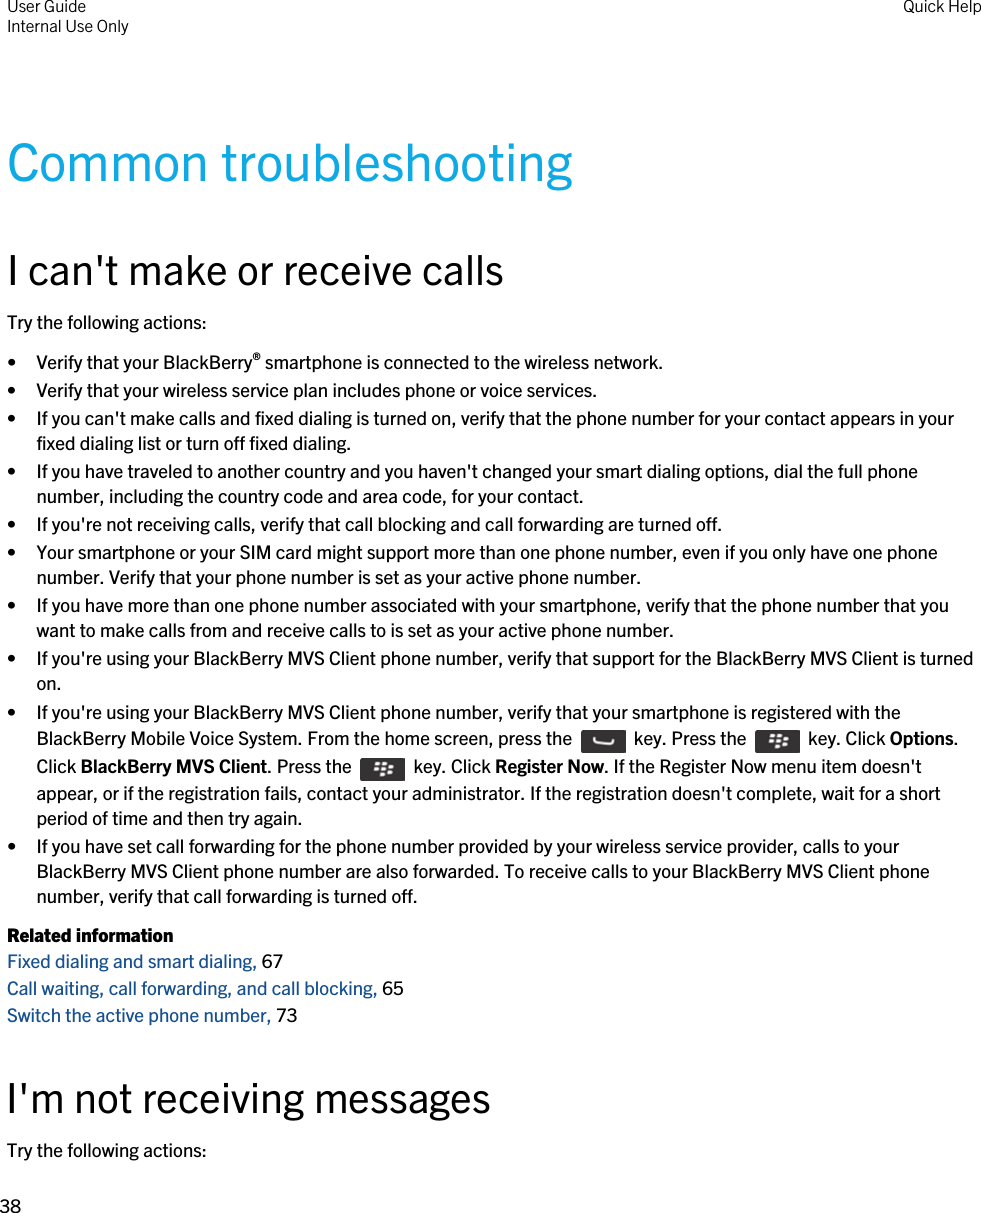 Common troubleshootingI can&apos;t make or receive callsTry the following actions:• Verify that your BlackBerry® smartphone is connected to the wireless network.• Verify that your wireless service plan includes phone or voice services.• If you can&apos;t make calls and fixed dialing is turned on, verify that the phone number for your contact appears in your fixed dialing list or turn off fixed dialing.• If you have traveled to another country and you haven&apos;t changed your smart dialing options, dial the full phone number, including the country code and area code, for your contact.• If you&apos;re not receiving calls, verify that call blocking and call forwarding are turned off.• Your smartphone or your SIM card might support more than one phone number, even if you only have one phone number. Verify that your phone number is set as your active phone number.• If you have more than one phone number associated with your smartphone, verify that the phone number that you want to make calls from and receive calls to is set as your active phone number.• If you&apos;re using your BlackBerry MVS Client phone number, verify that support for the BlackBerry MVS Client is turned on.• If you&apos;re using your BlackBerry MVS Client phone number, verify that your smartphone is registered with the BlackBerry Mobile Voice System. From the home screen, press the    key. Press the    key. Click Options. Click BlackBerry MVS Client. Press the    key. Click Register Now. If the Register Now menu item doesn&apos;t appear, or if the registration fails, contact your administrator. If the registration doesn&apos;t complete, wait for a short period of time and then try again.• If you have set call forwarding for the phone number provided by your wireless service provider, calls to your BlackBerry MVS Client phone number are also forwarded. To receive calls to your BlackBerry MVS Client phone number, verify that call forwarding is turned off.Related informationFixed dialing and smart dialing, 67Call waiting, call forwarding, and call blocking, 65Switch the active phone number, 73I&apos;m not receiving messagesTry the following actions:User GuideInternal Use Only Quick Help38 